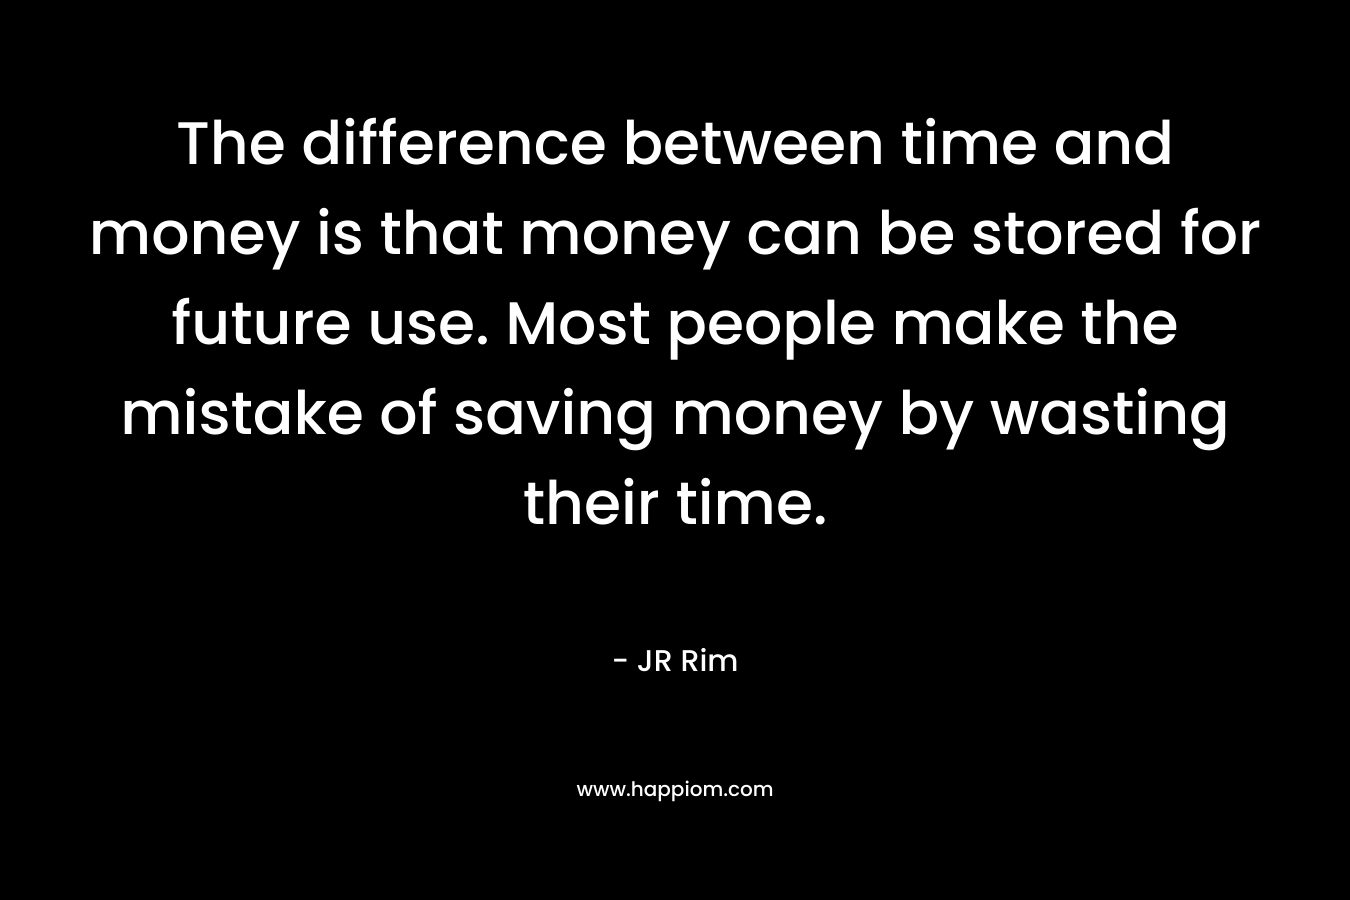 The difference between time and money is that money can be stored for future use. Most people make the mistake of saving money by wasting their time.